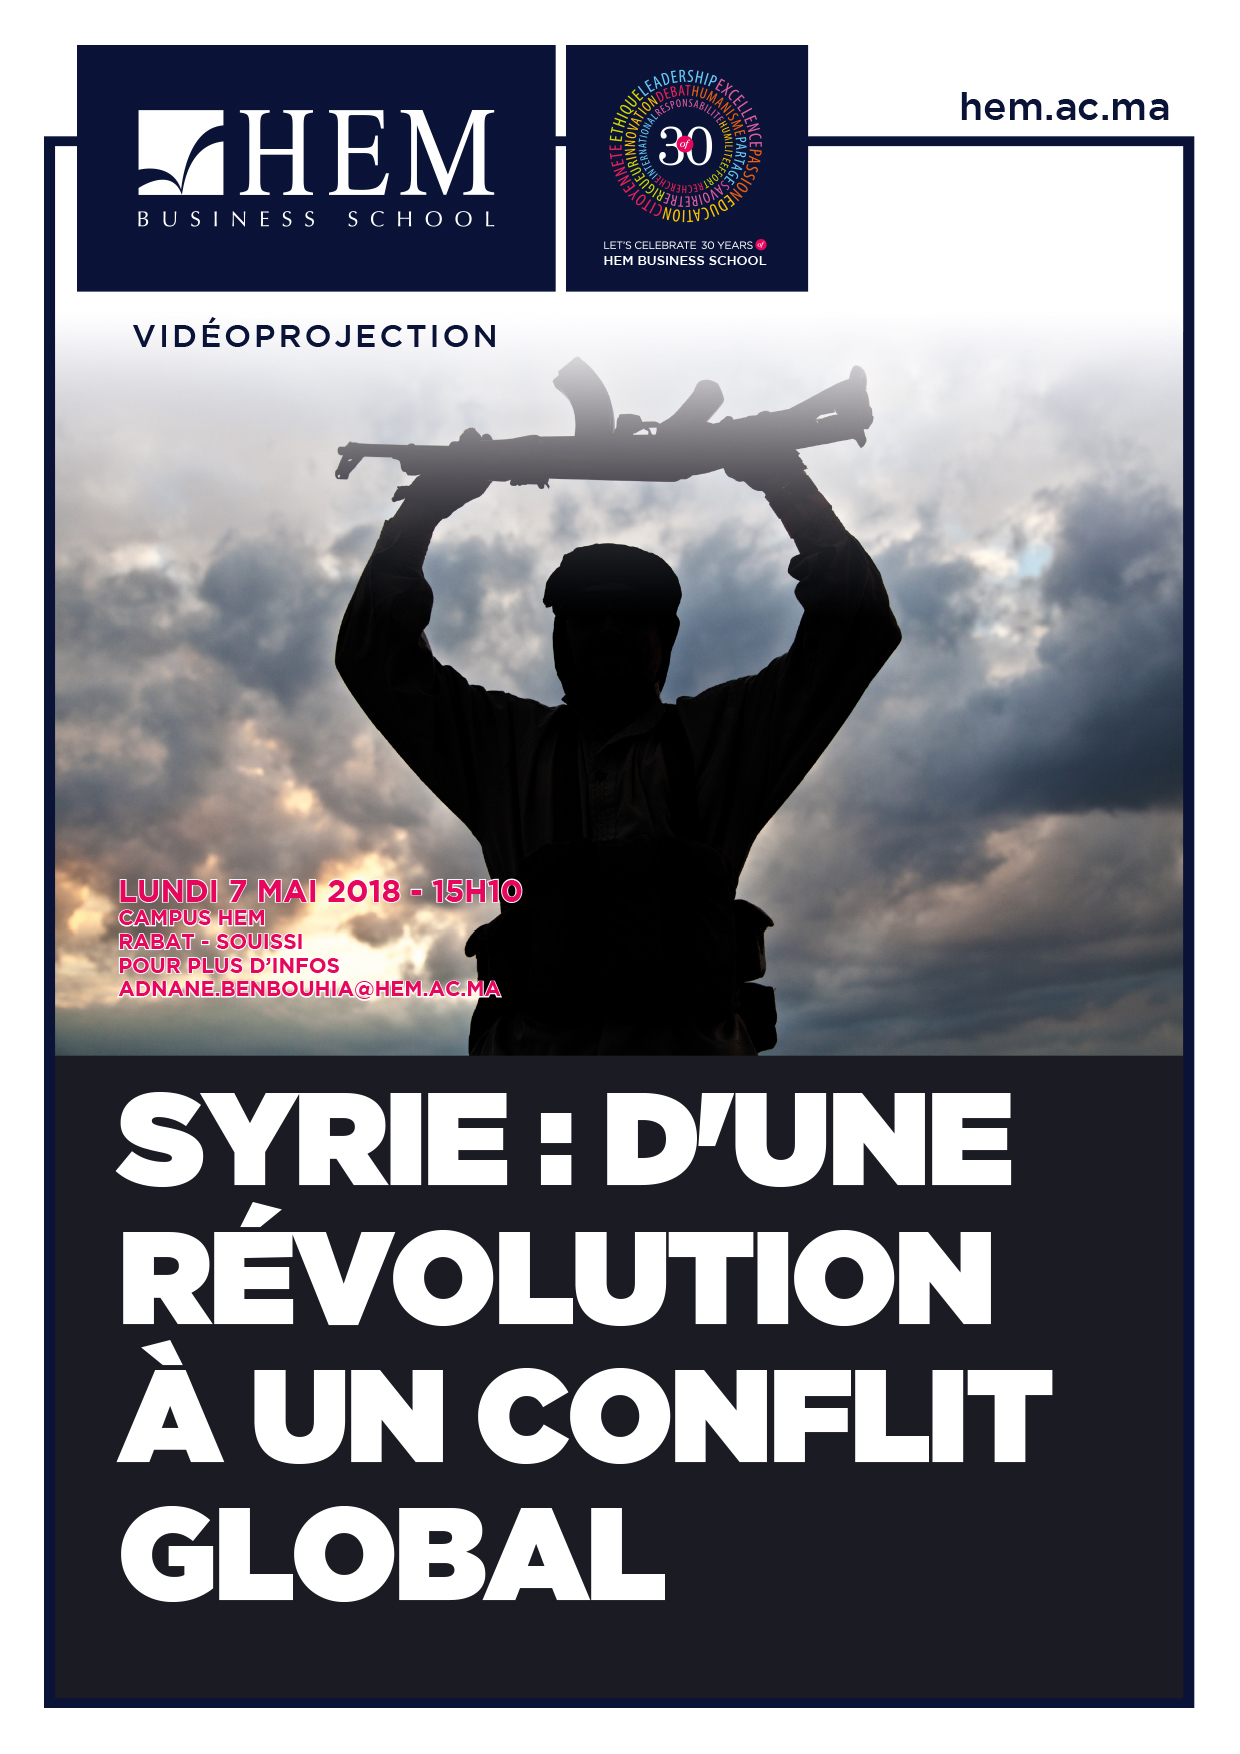 video-projection-syrie-dune-revolution-conflit-global